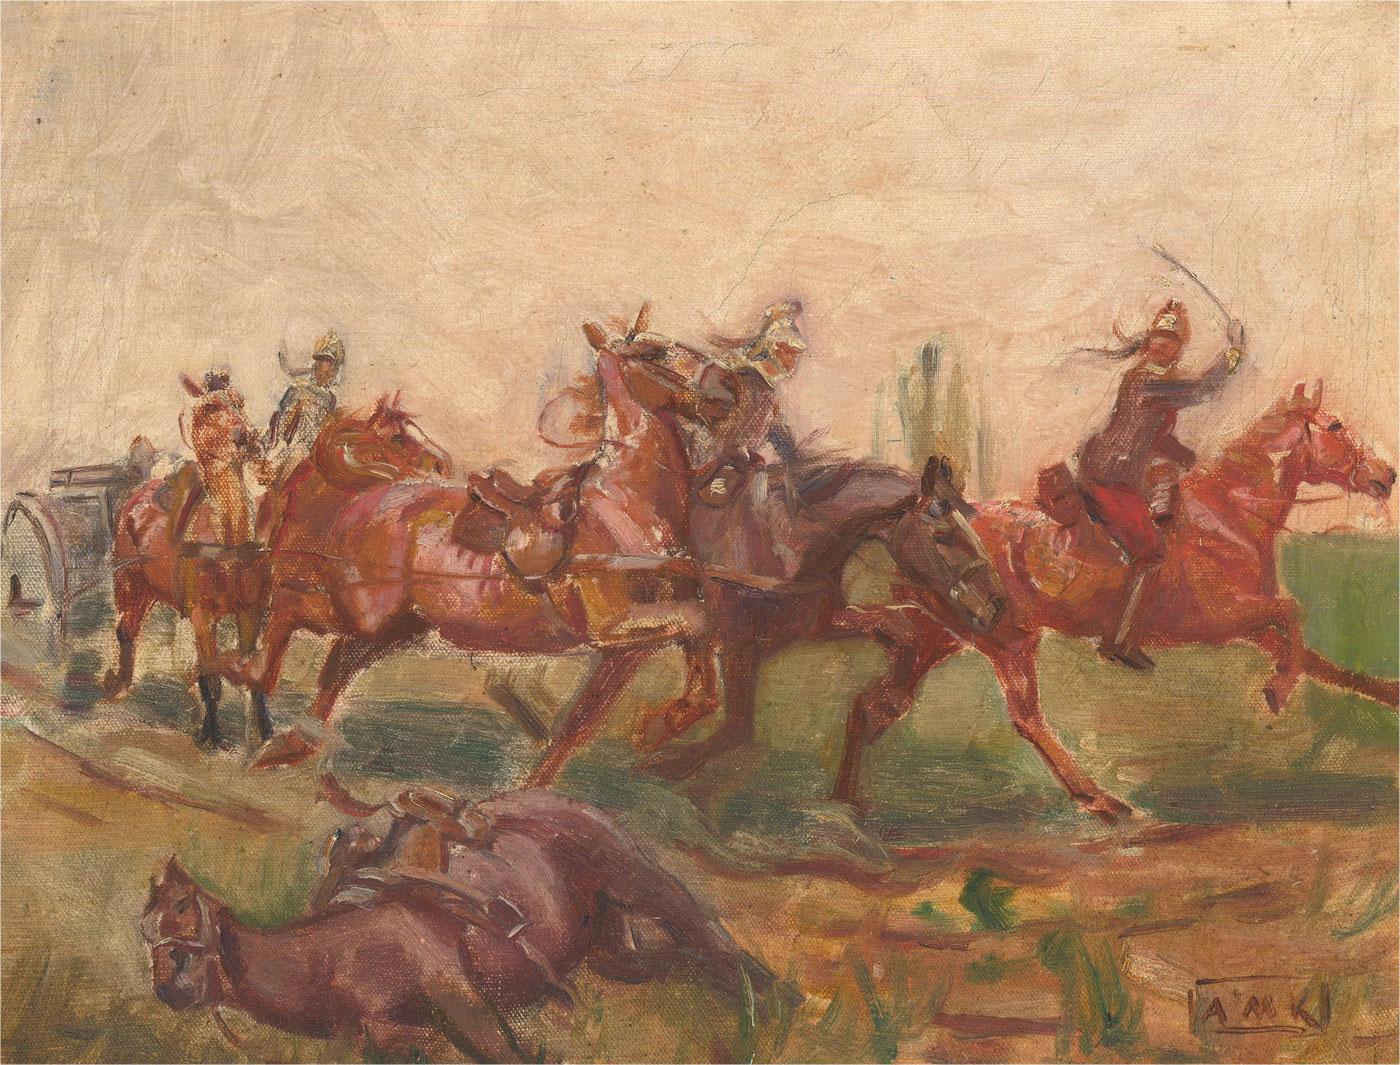 A dynamic painting of a cavalry charge with horses drawing artillery. Initialled to the lower-right corner. On canvas on stretchers.
